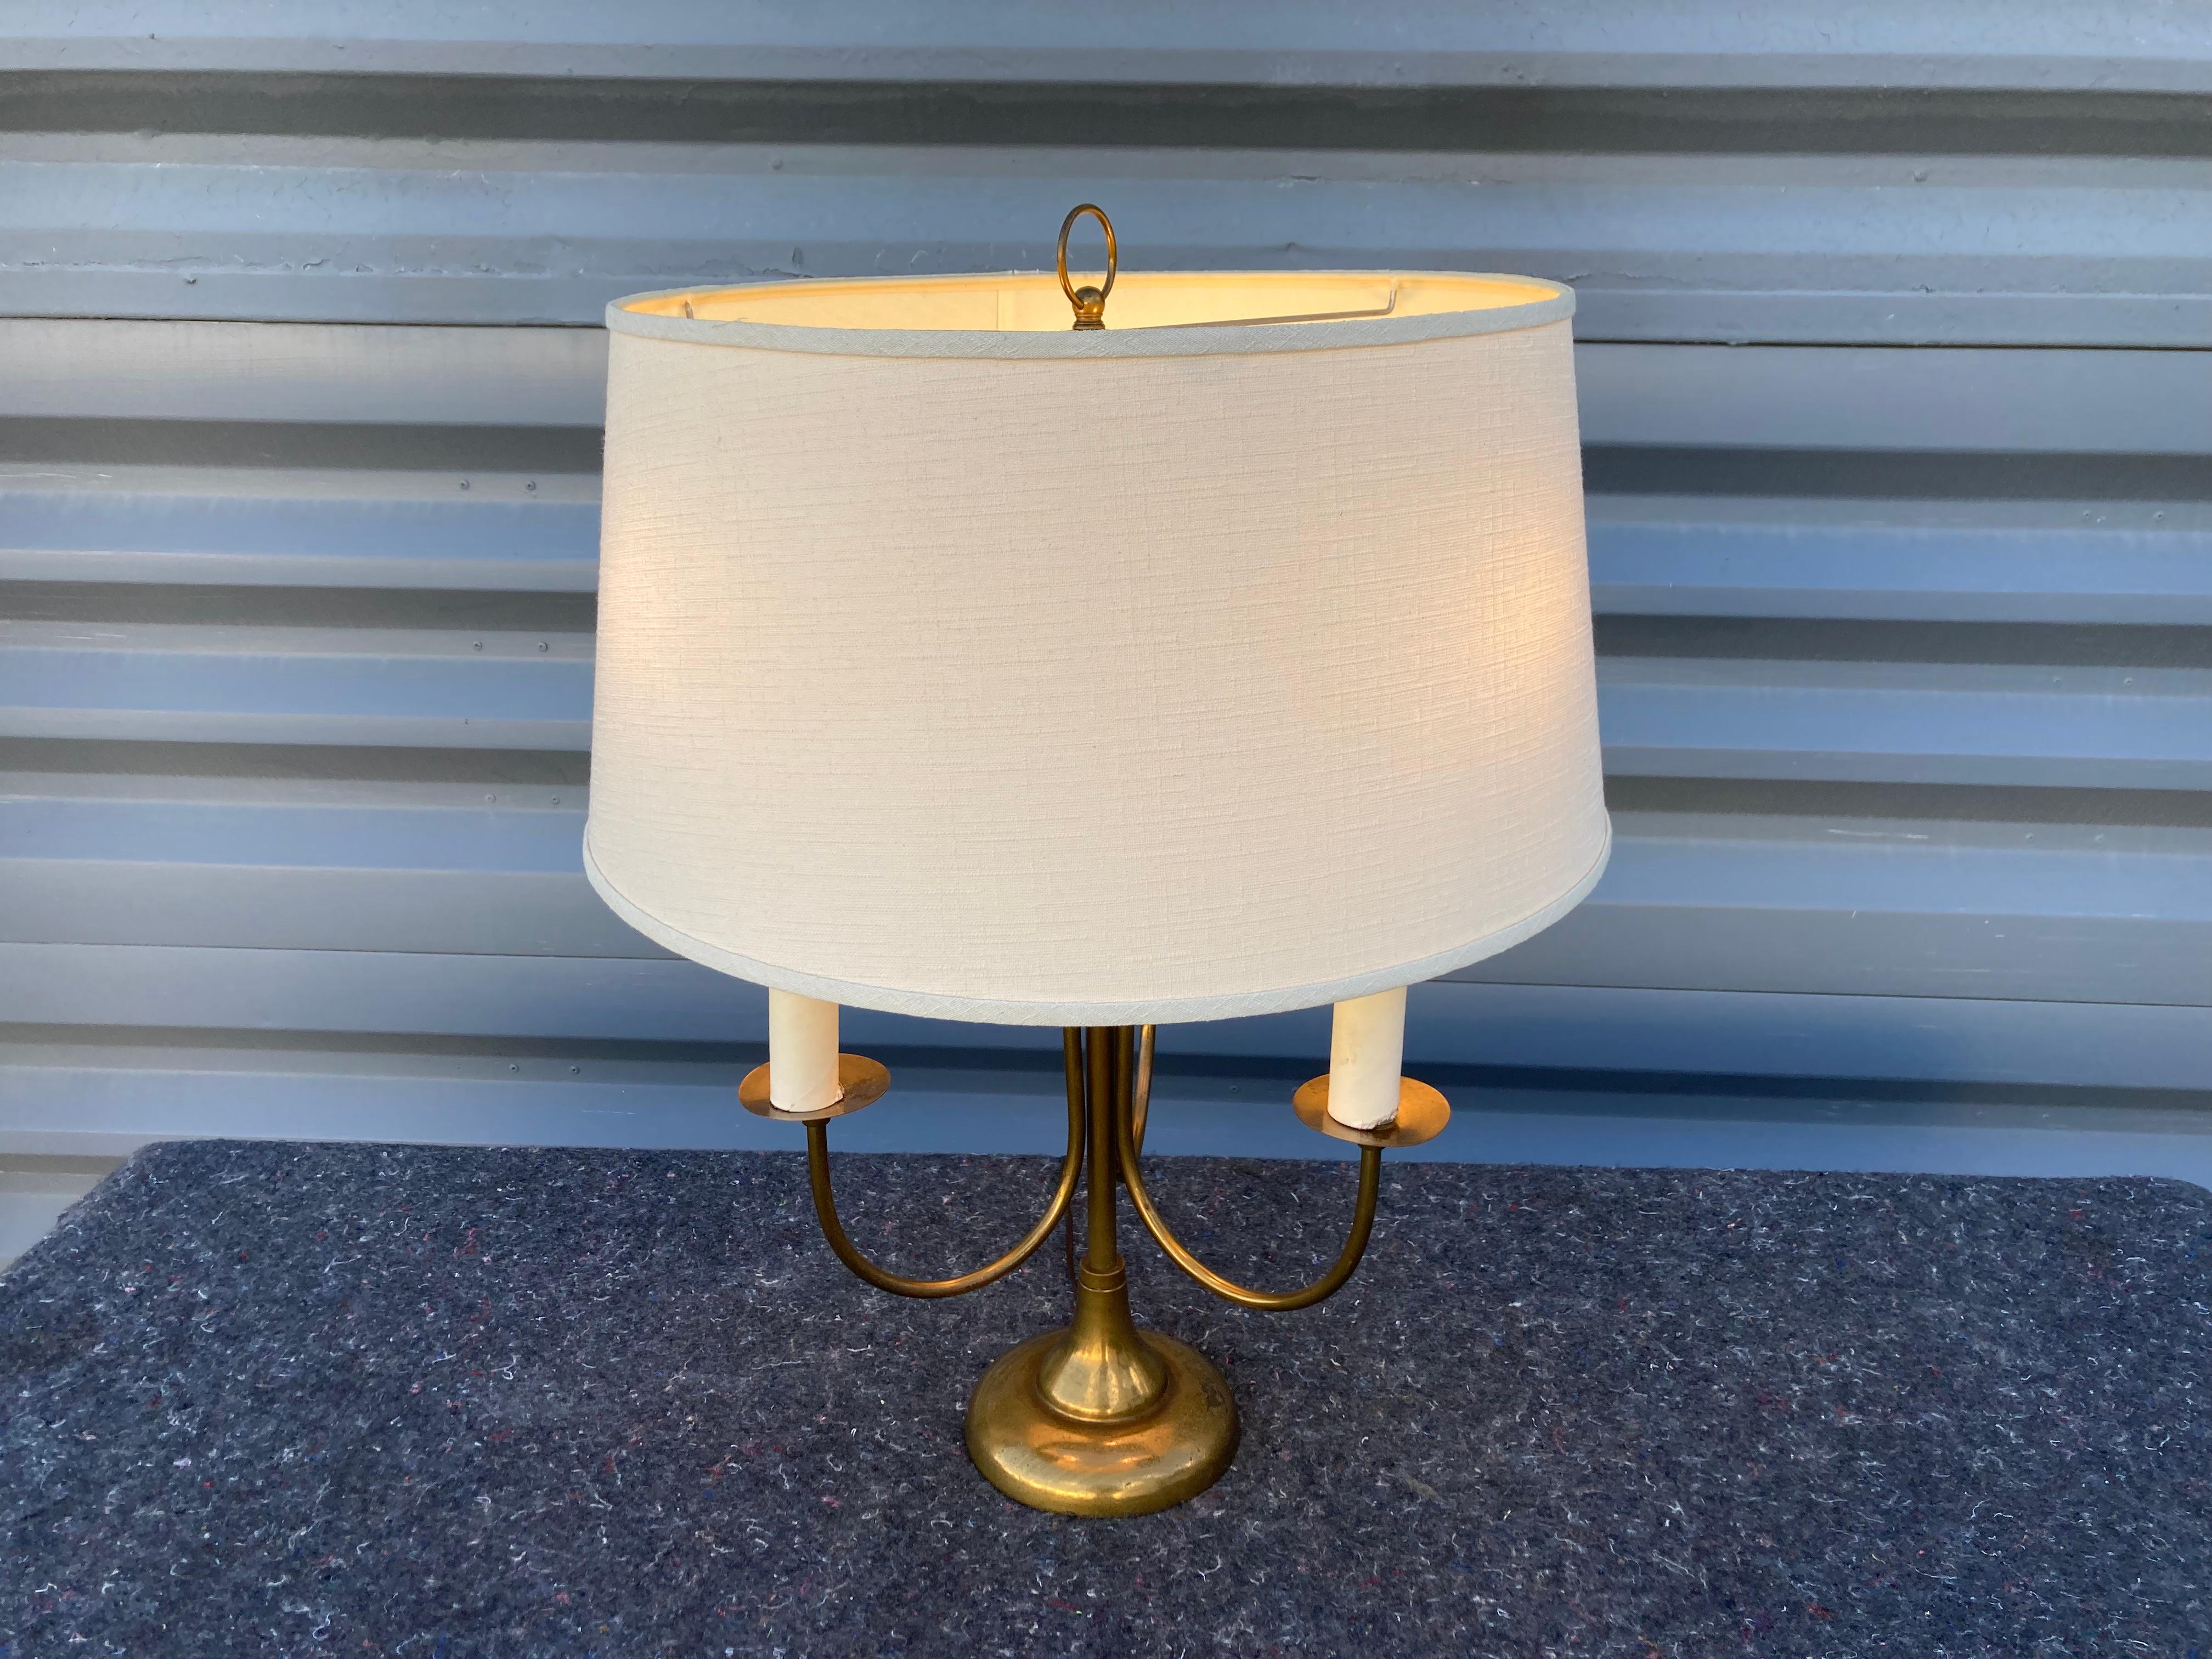 Pair of Mid-Century Modern Table Lamps, Brass, USA, 1950s For Sale 4